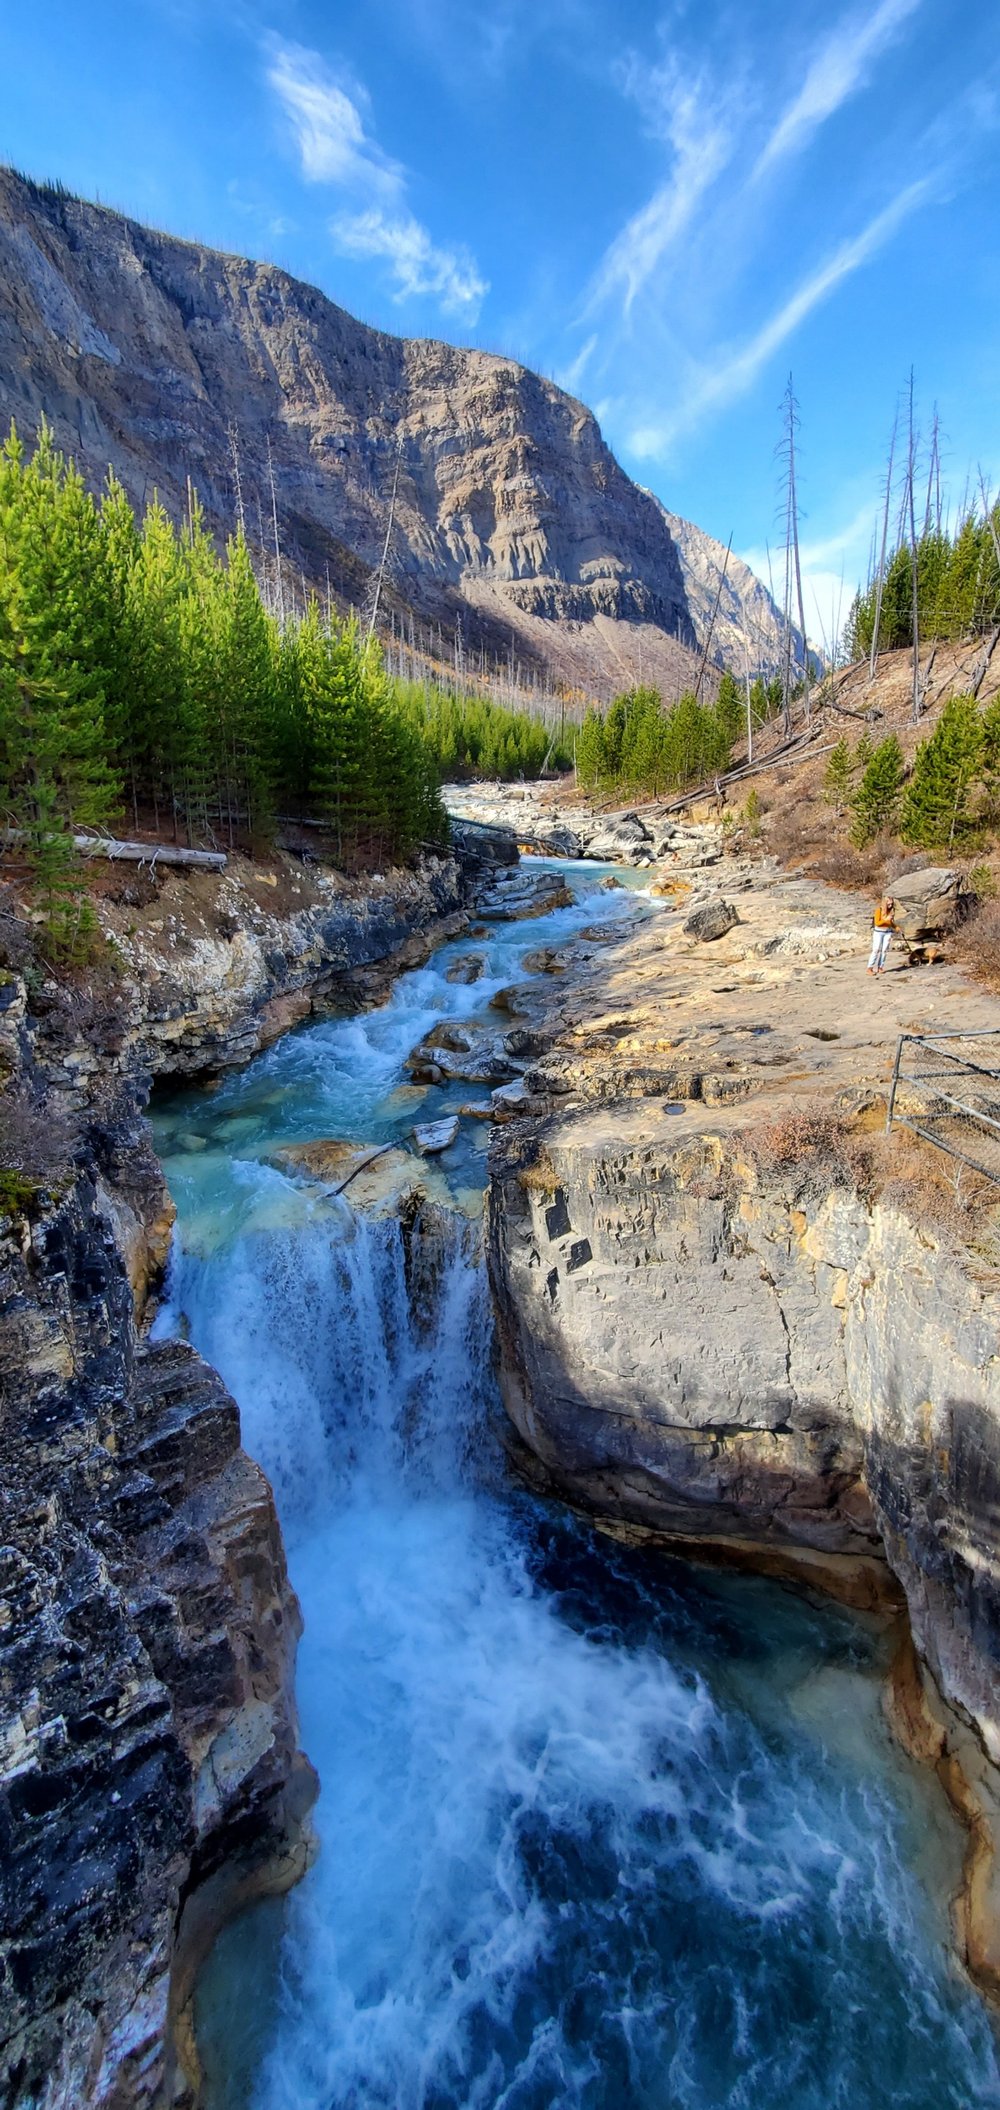 Marble Canyon: A Natural Marvel on the Outskirts of Banff National Park